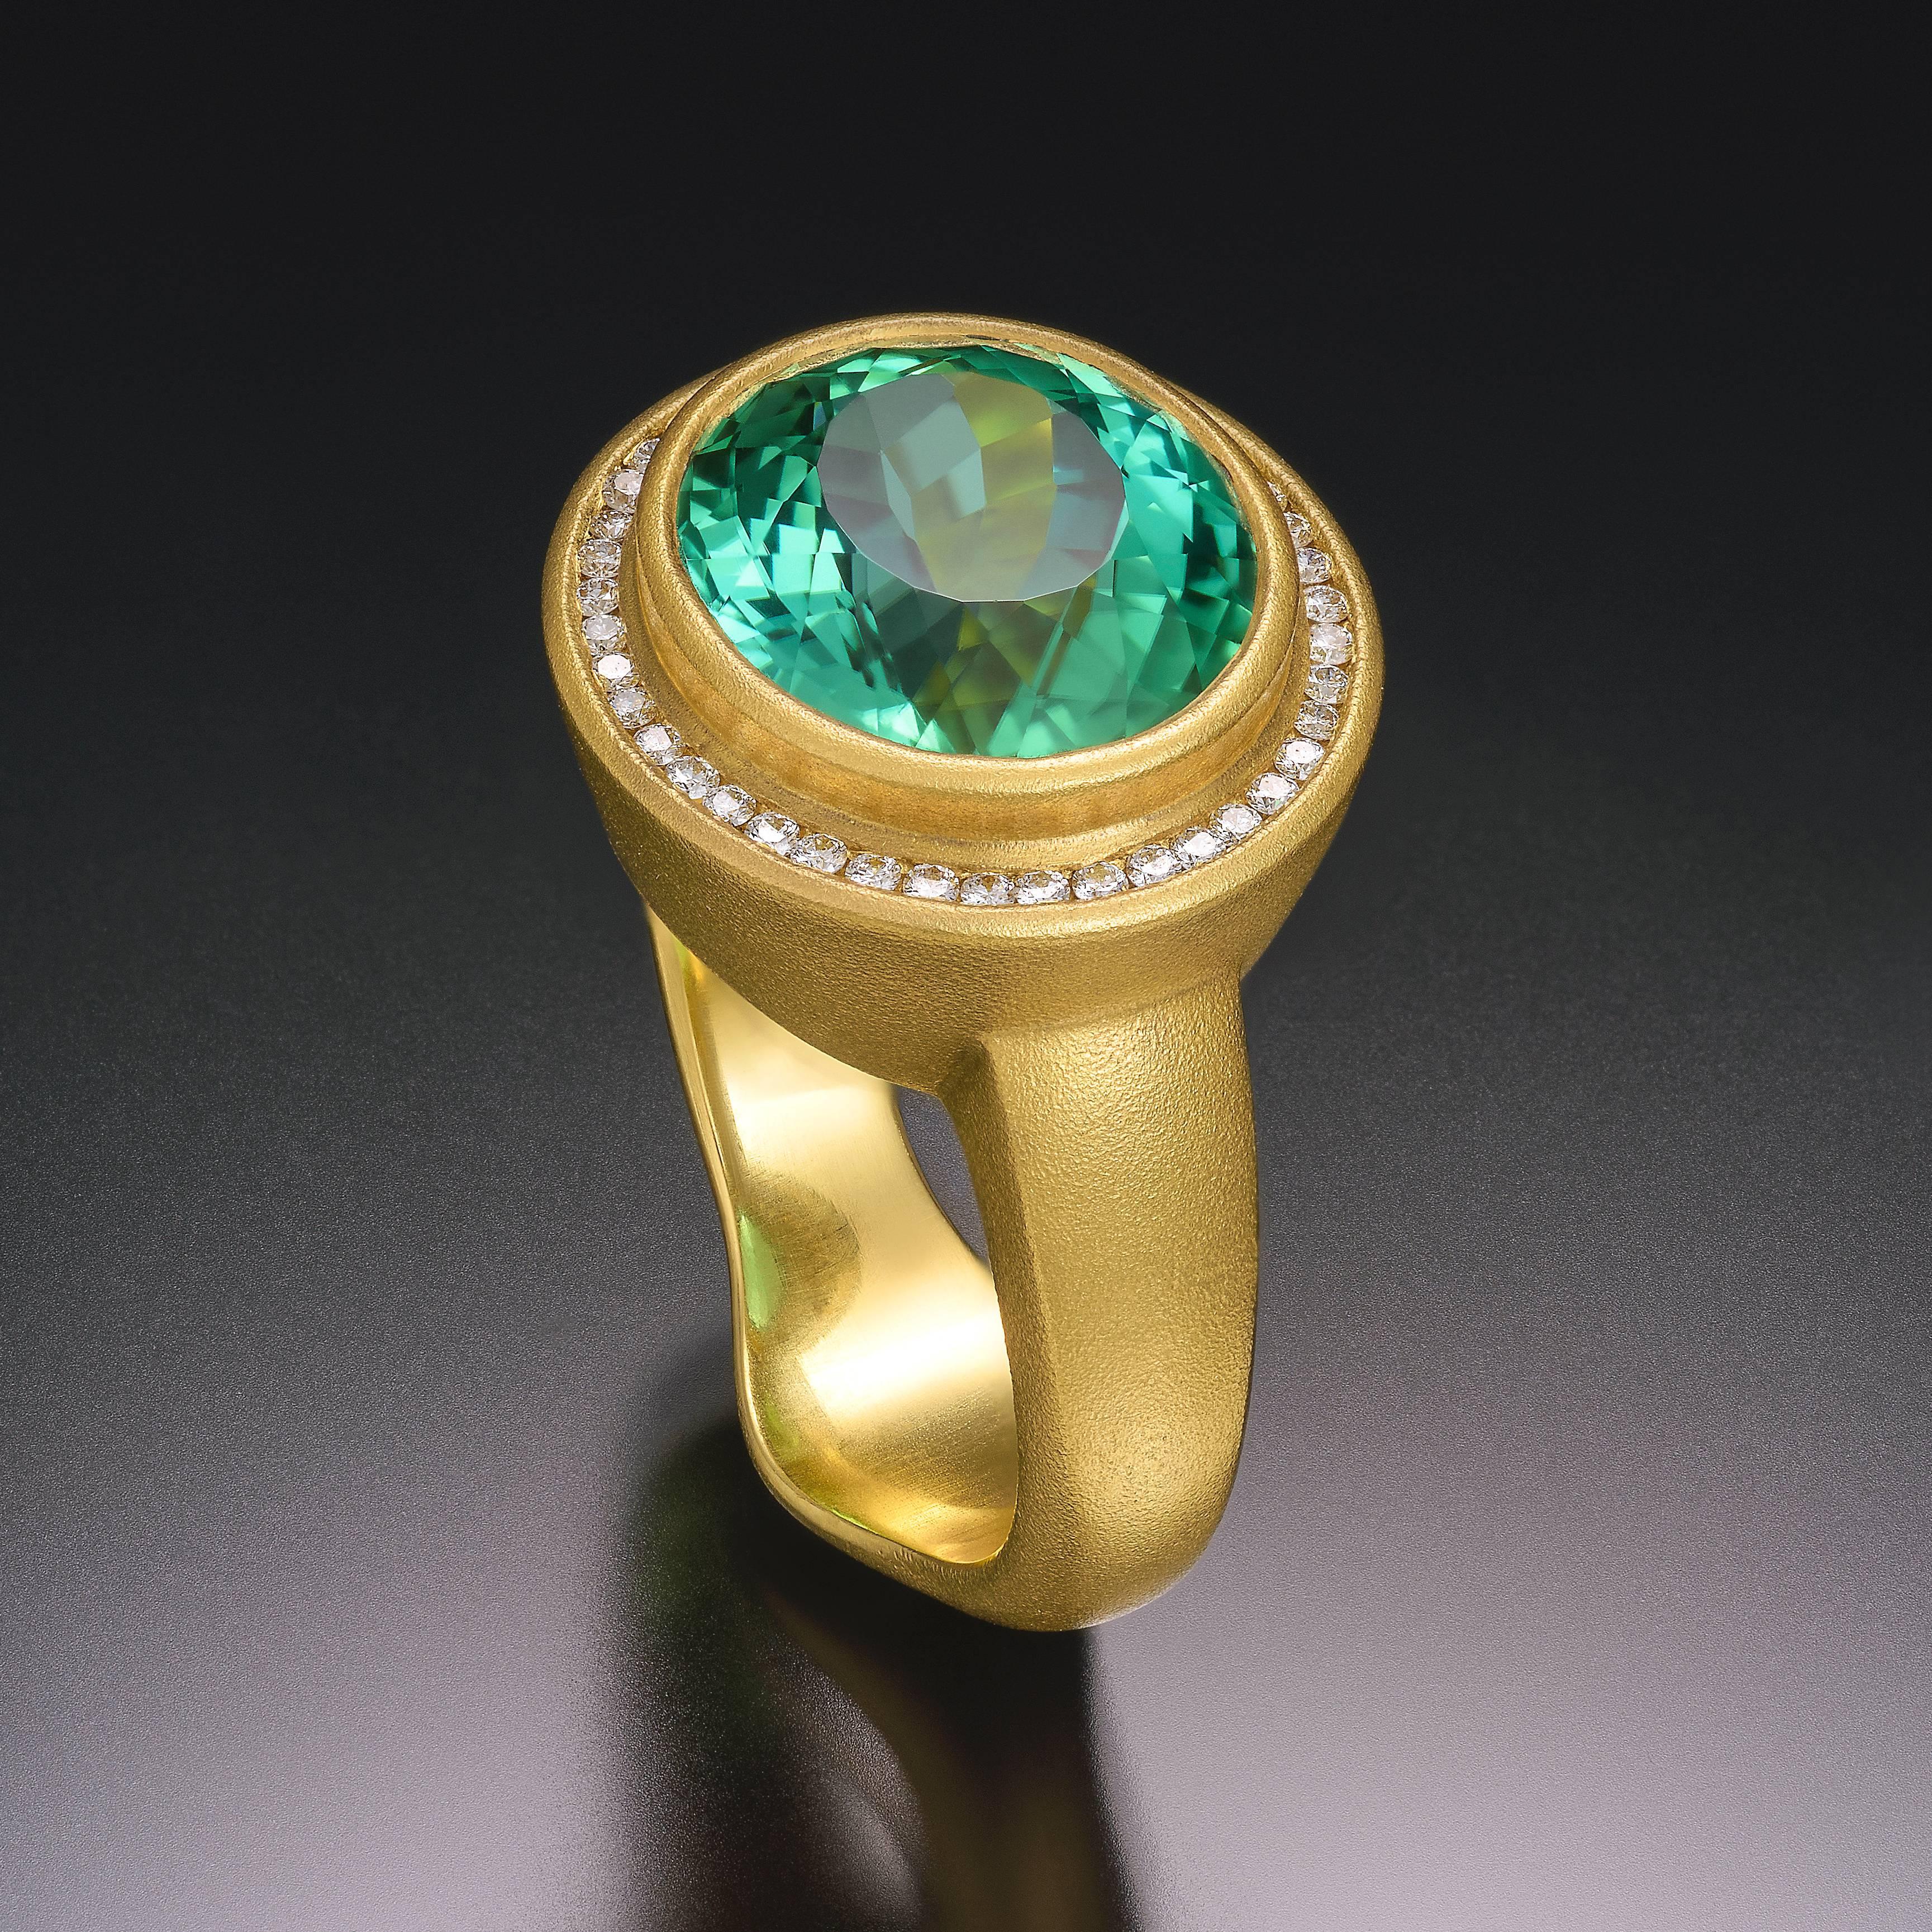 Handcrafted 22kt Gold Ring set with very rare 6.65 Green Mozambique Tourmaline and 42 Fvs white Diamonds. Brilliant sparkle and personality.

* Each piece is designed and crafted entirely by hand in the traditional way, using age old techniques